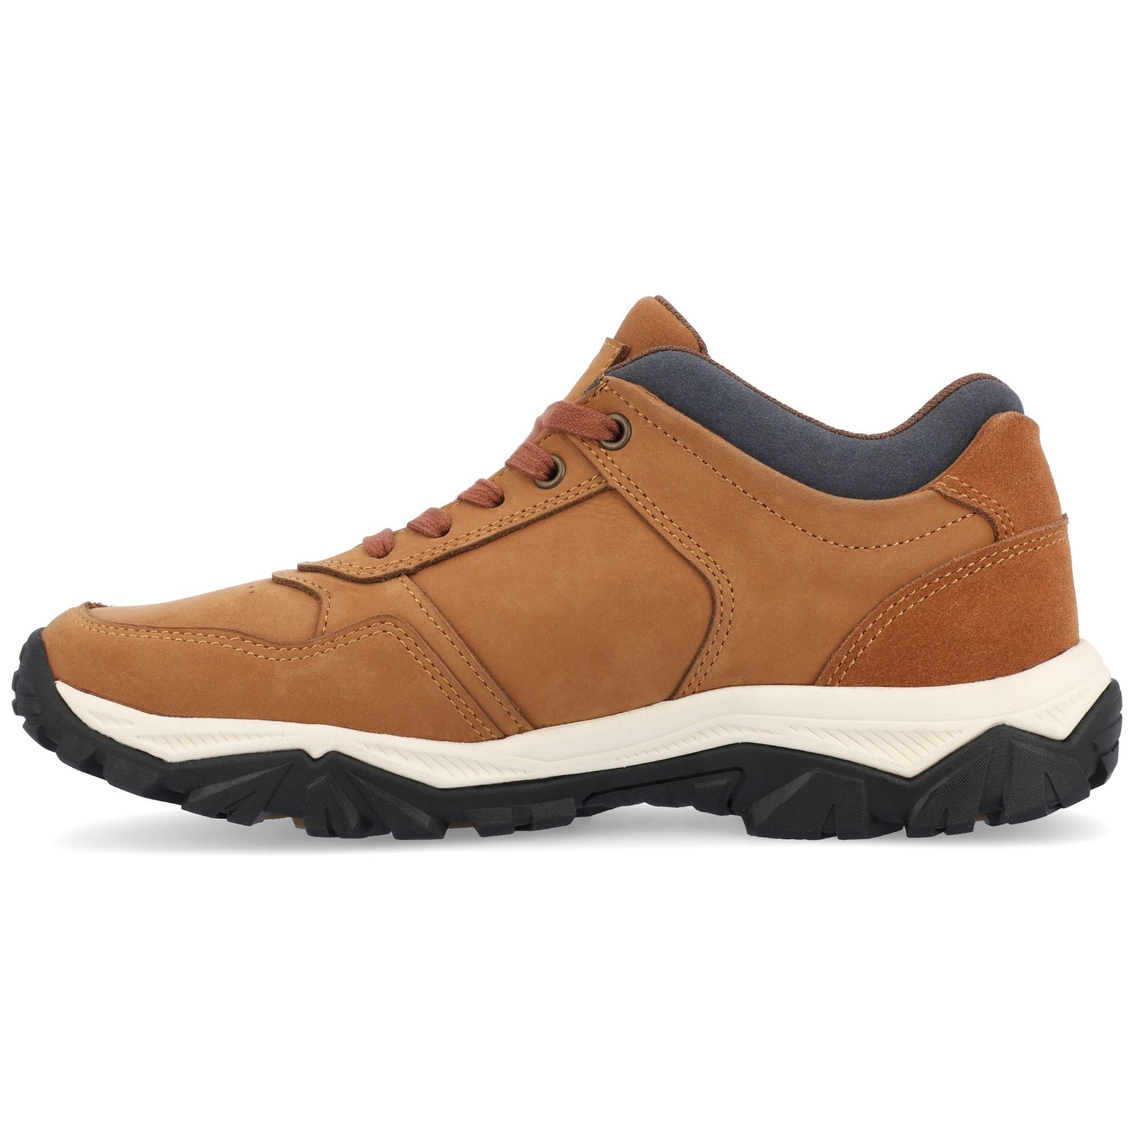 Territory Beacon Casual Leather Sneaker - Image 4 of 5